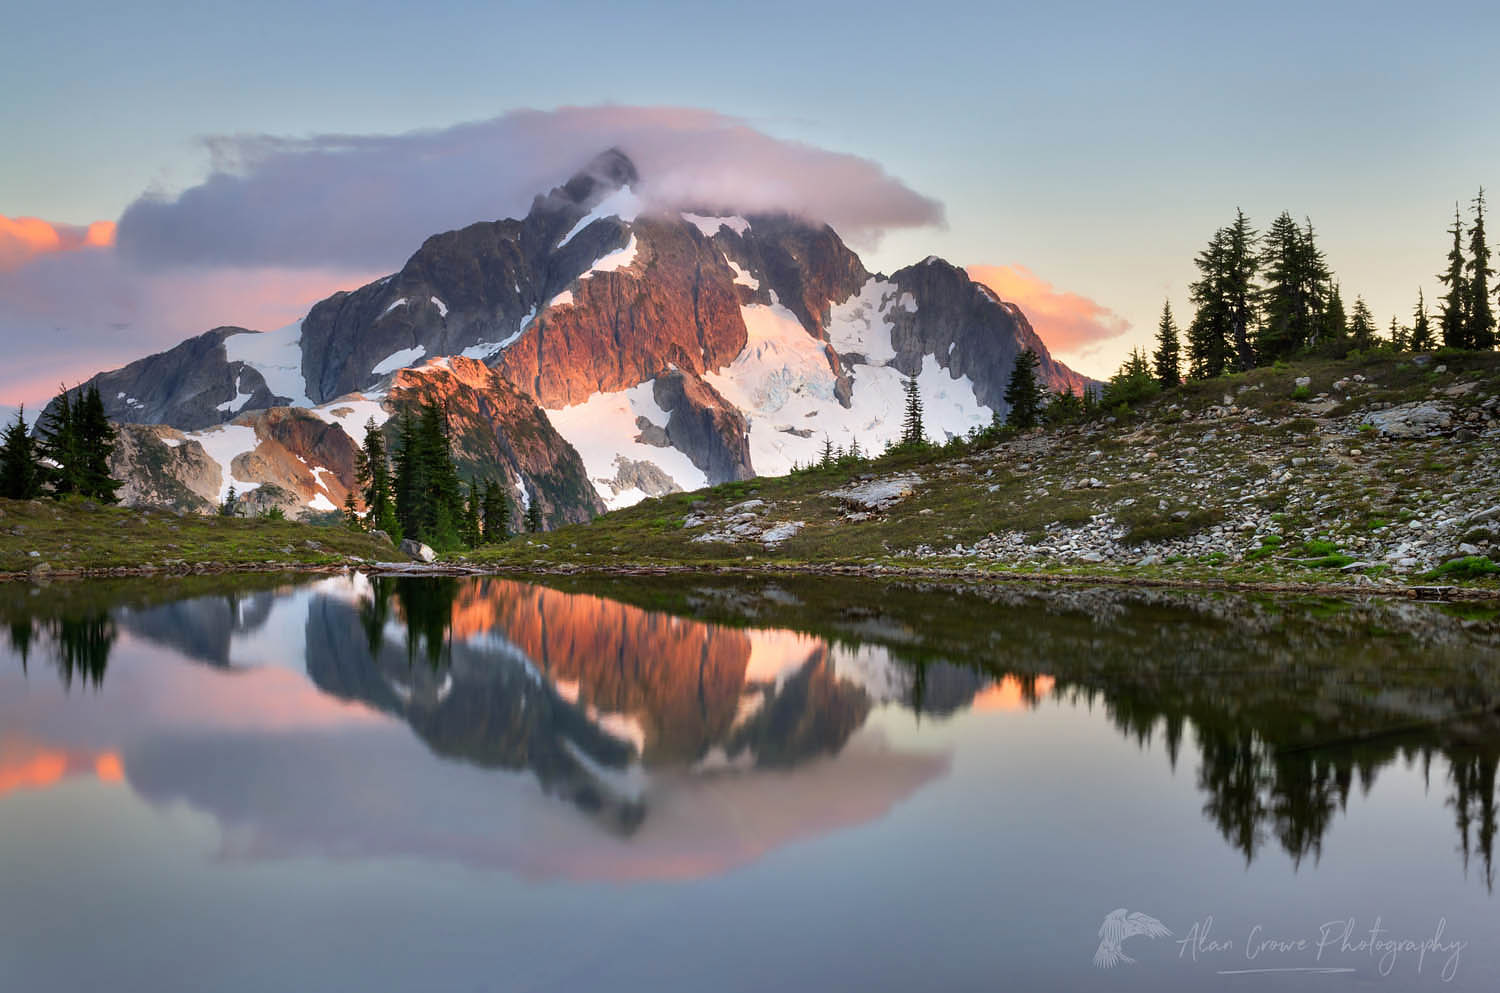 Whatcom Peak reflected in Tapto Lake, North Cascades National Park #61501